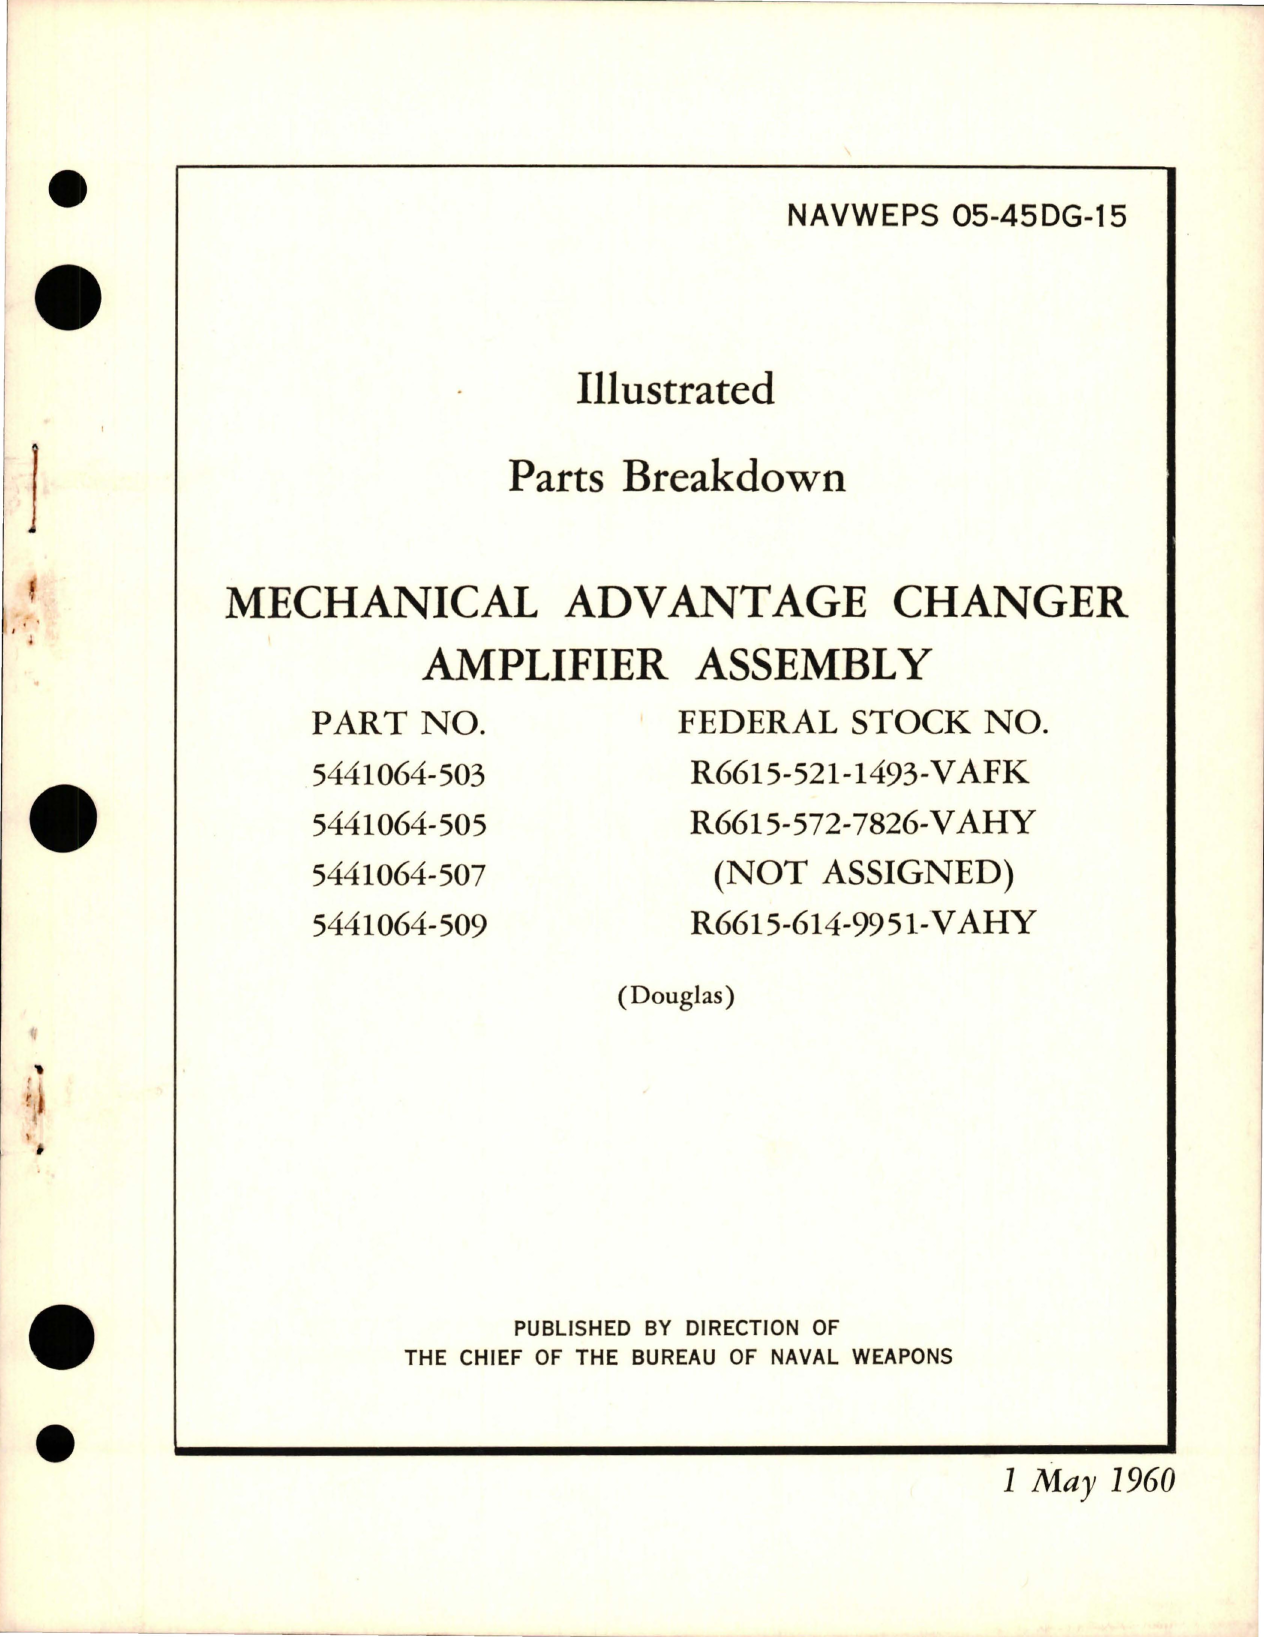 Sample page 1 from AirCorps Library document: Illustrated Parts Breakdown for Mechanical Advantage Changer Amplifier Assy